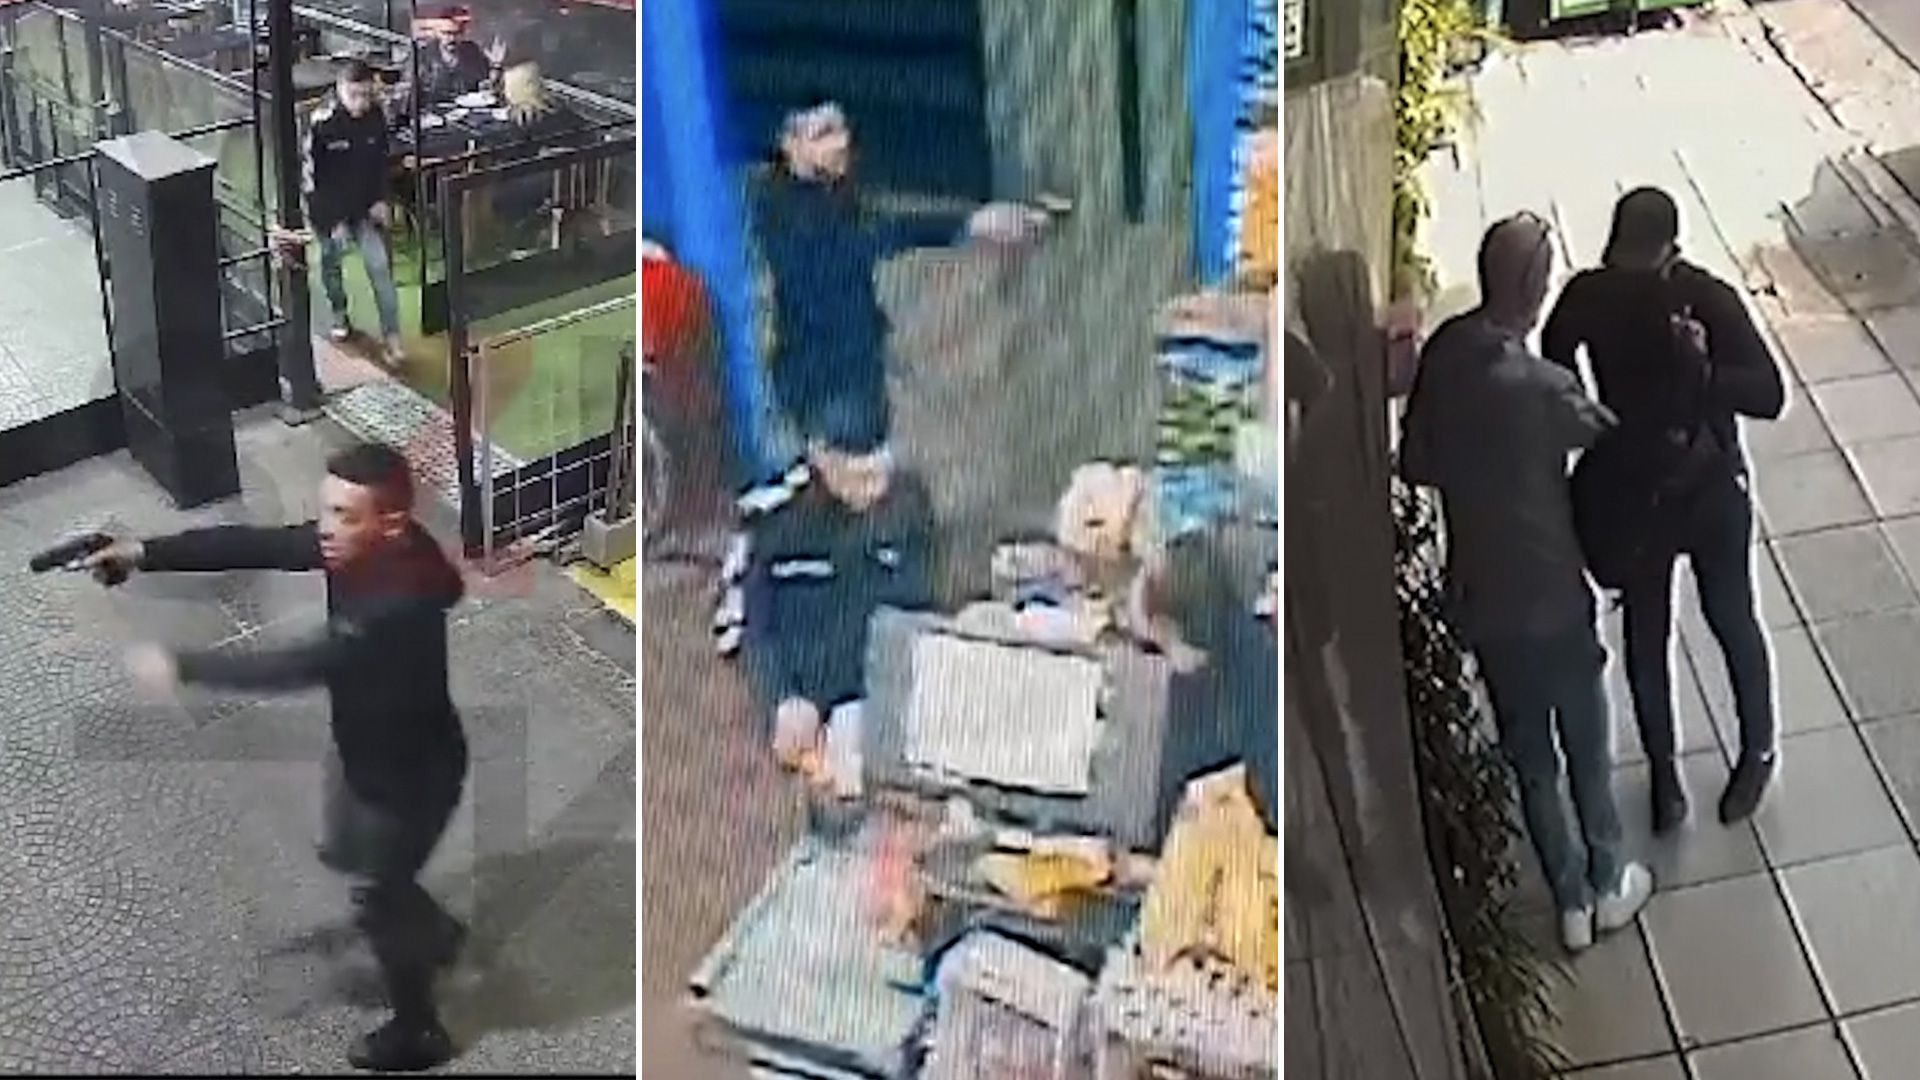 The criminals who perpetrated the three robberies that occurred in Barracas